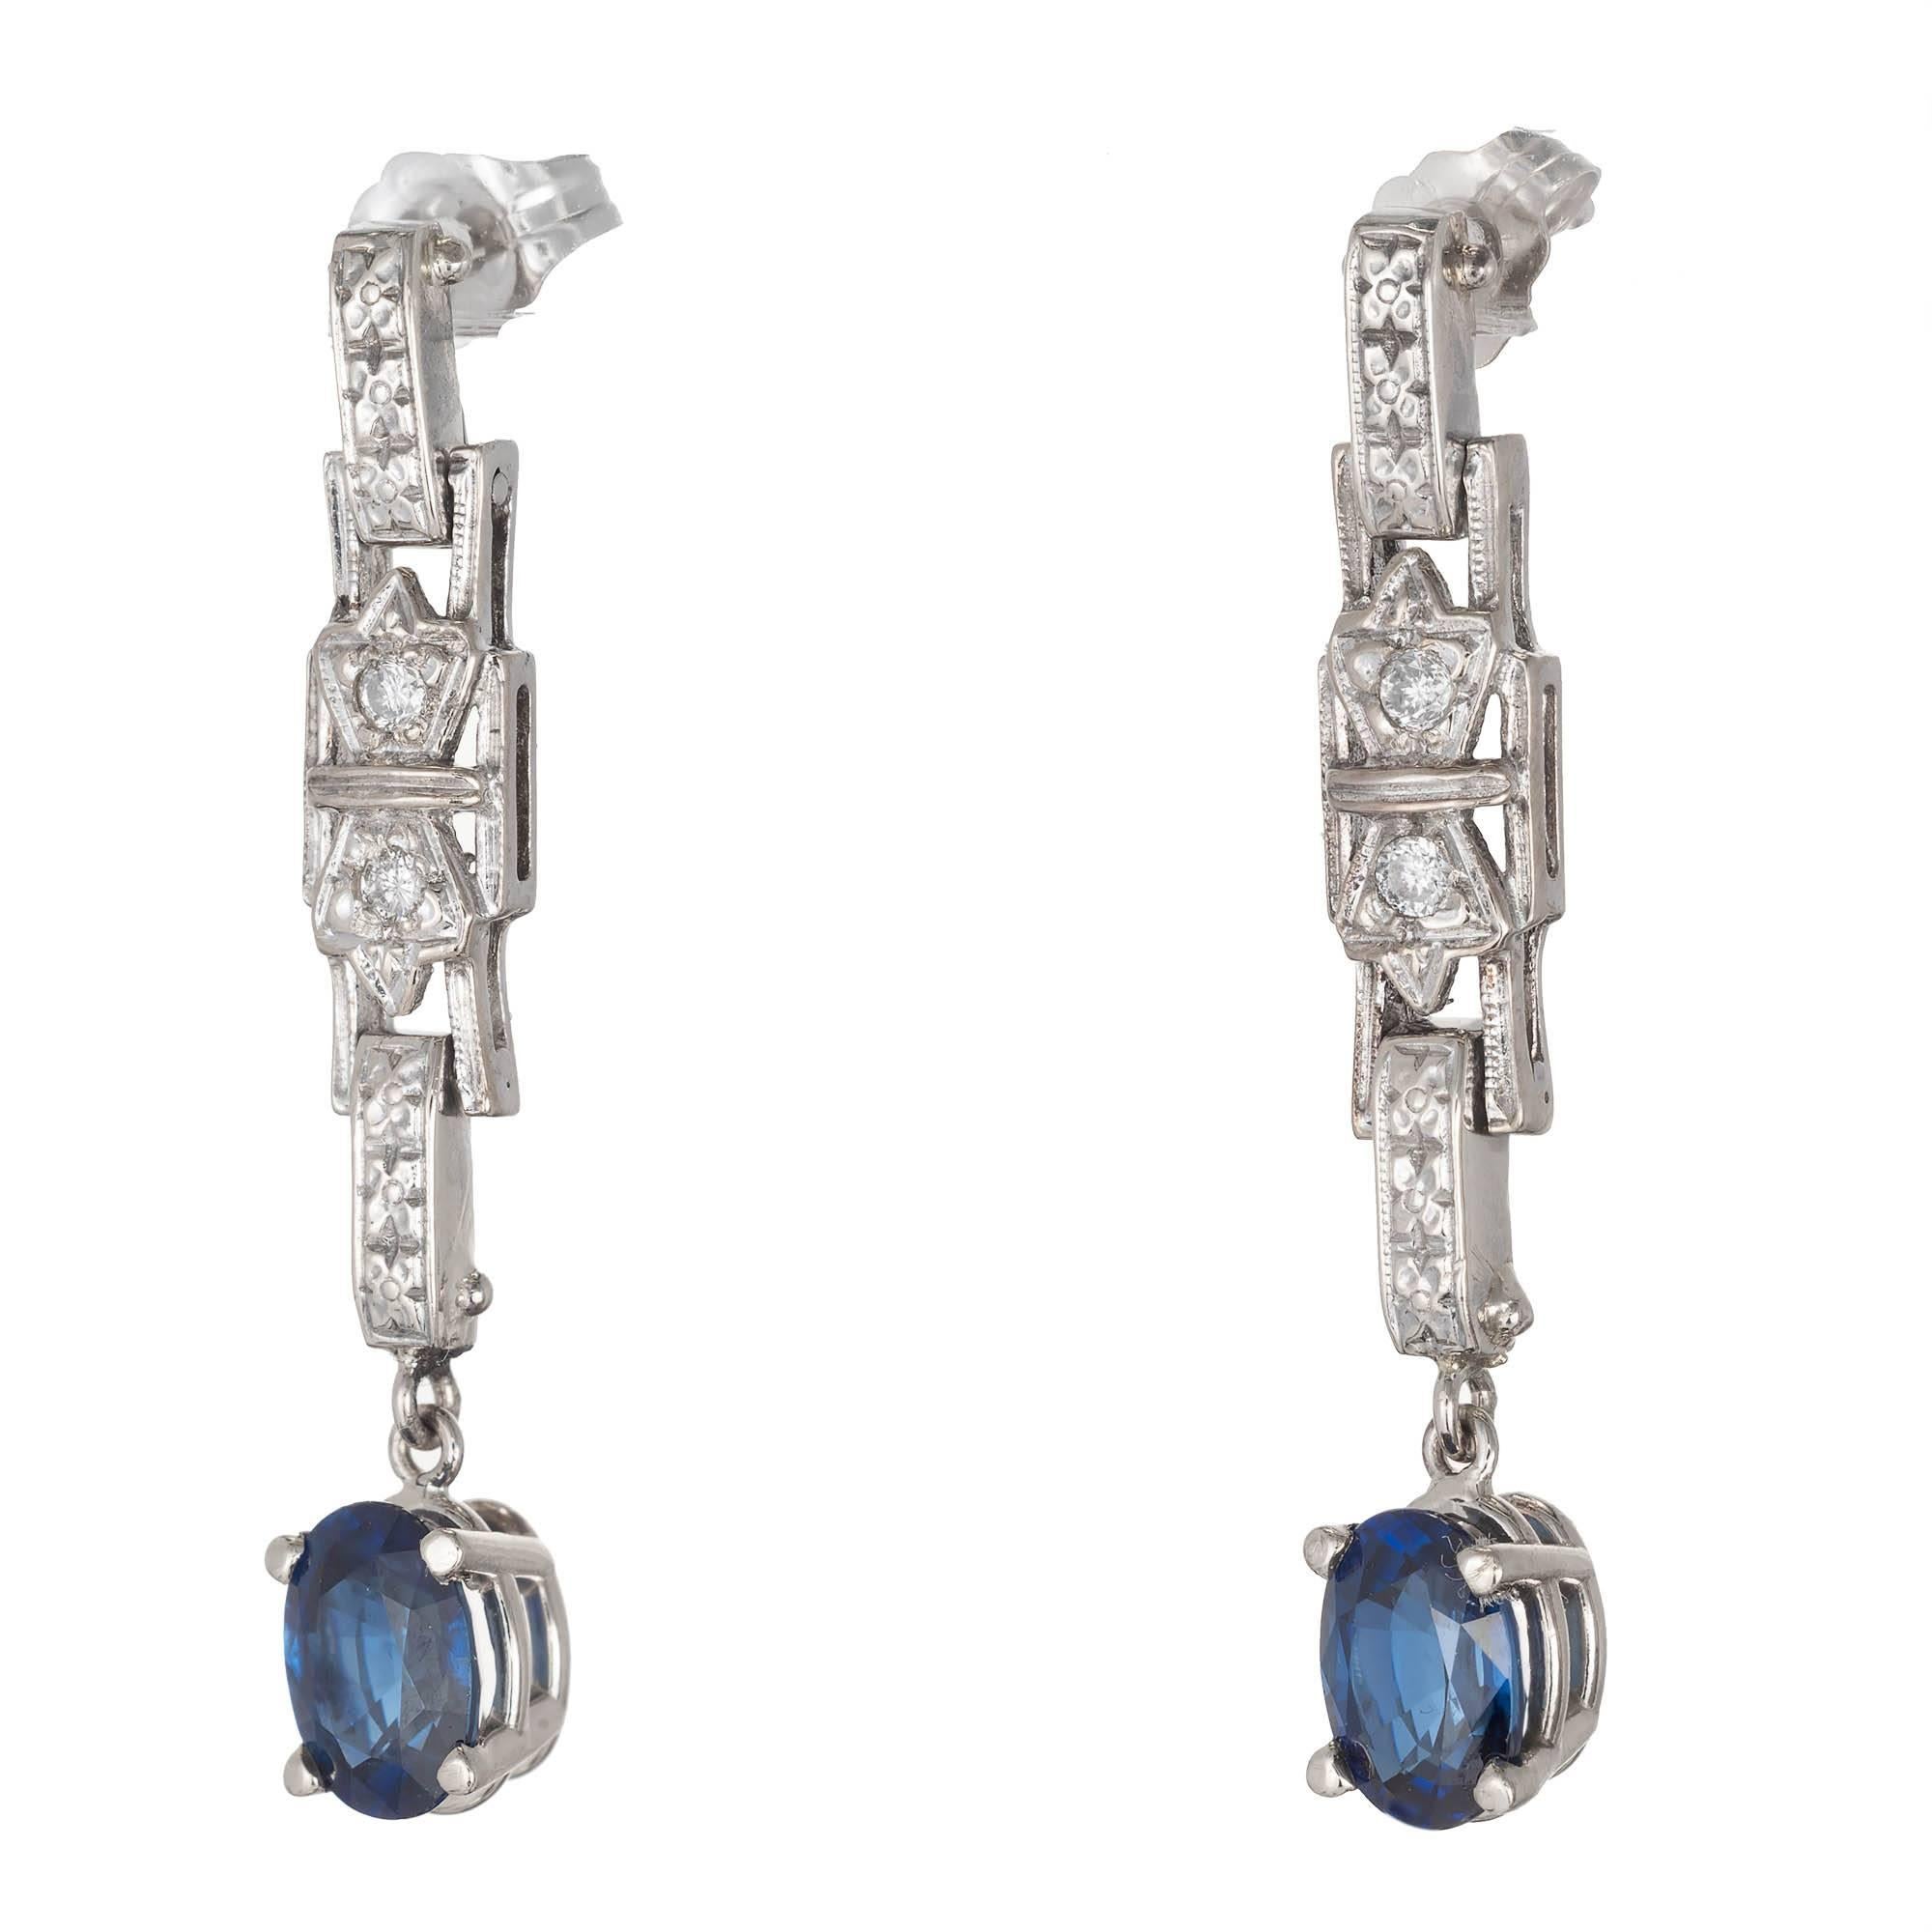 Art Deco Bright oval cornflower blue Sapphire and diamond dangle drop earrings, in 14k white gold. GIA certified as simple heat only no other enhancements, and small diamond accents.

2 oval cornflower blue Sapphires, approx. total weight 2.00cts,